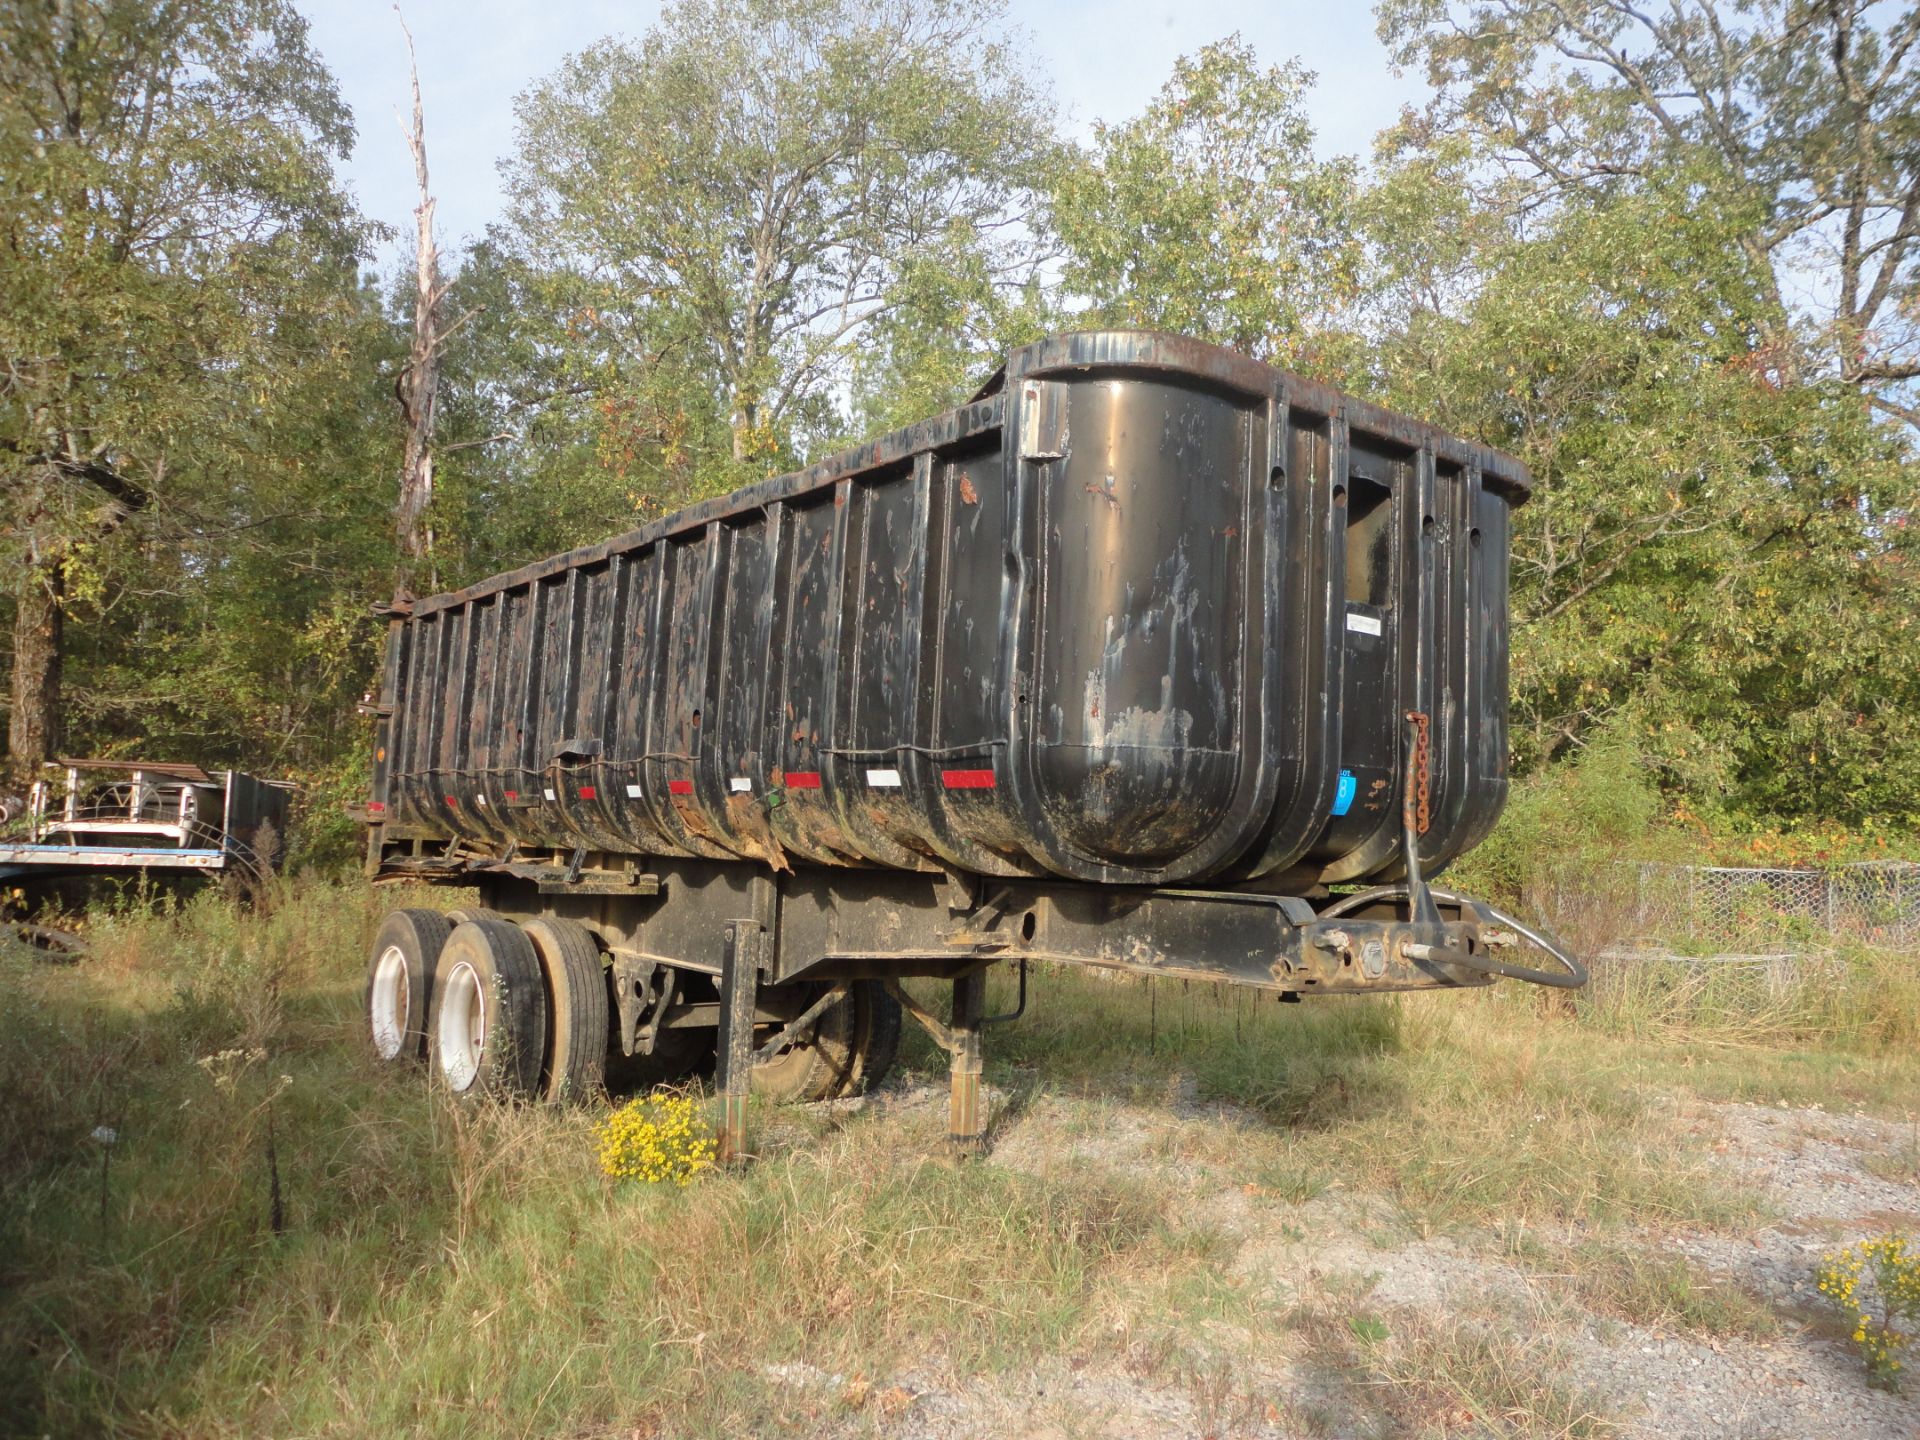 21' LONG X 5" SIDES APPROX. MFG. UNKNOWN HYDRAULIC TANDEM AXLE U-SHAPED STEEL BED DUMP TRAILER; - Image 2 of 6